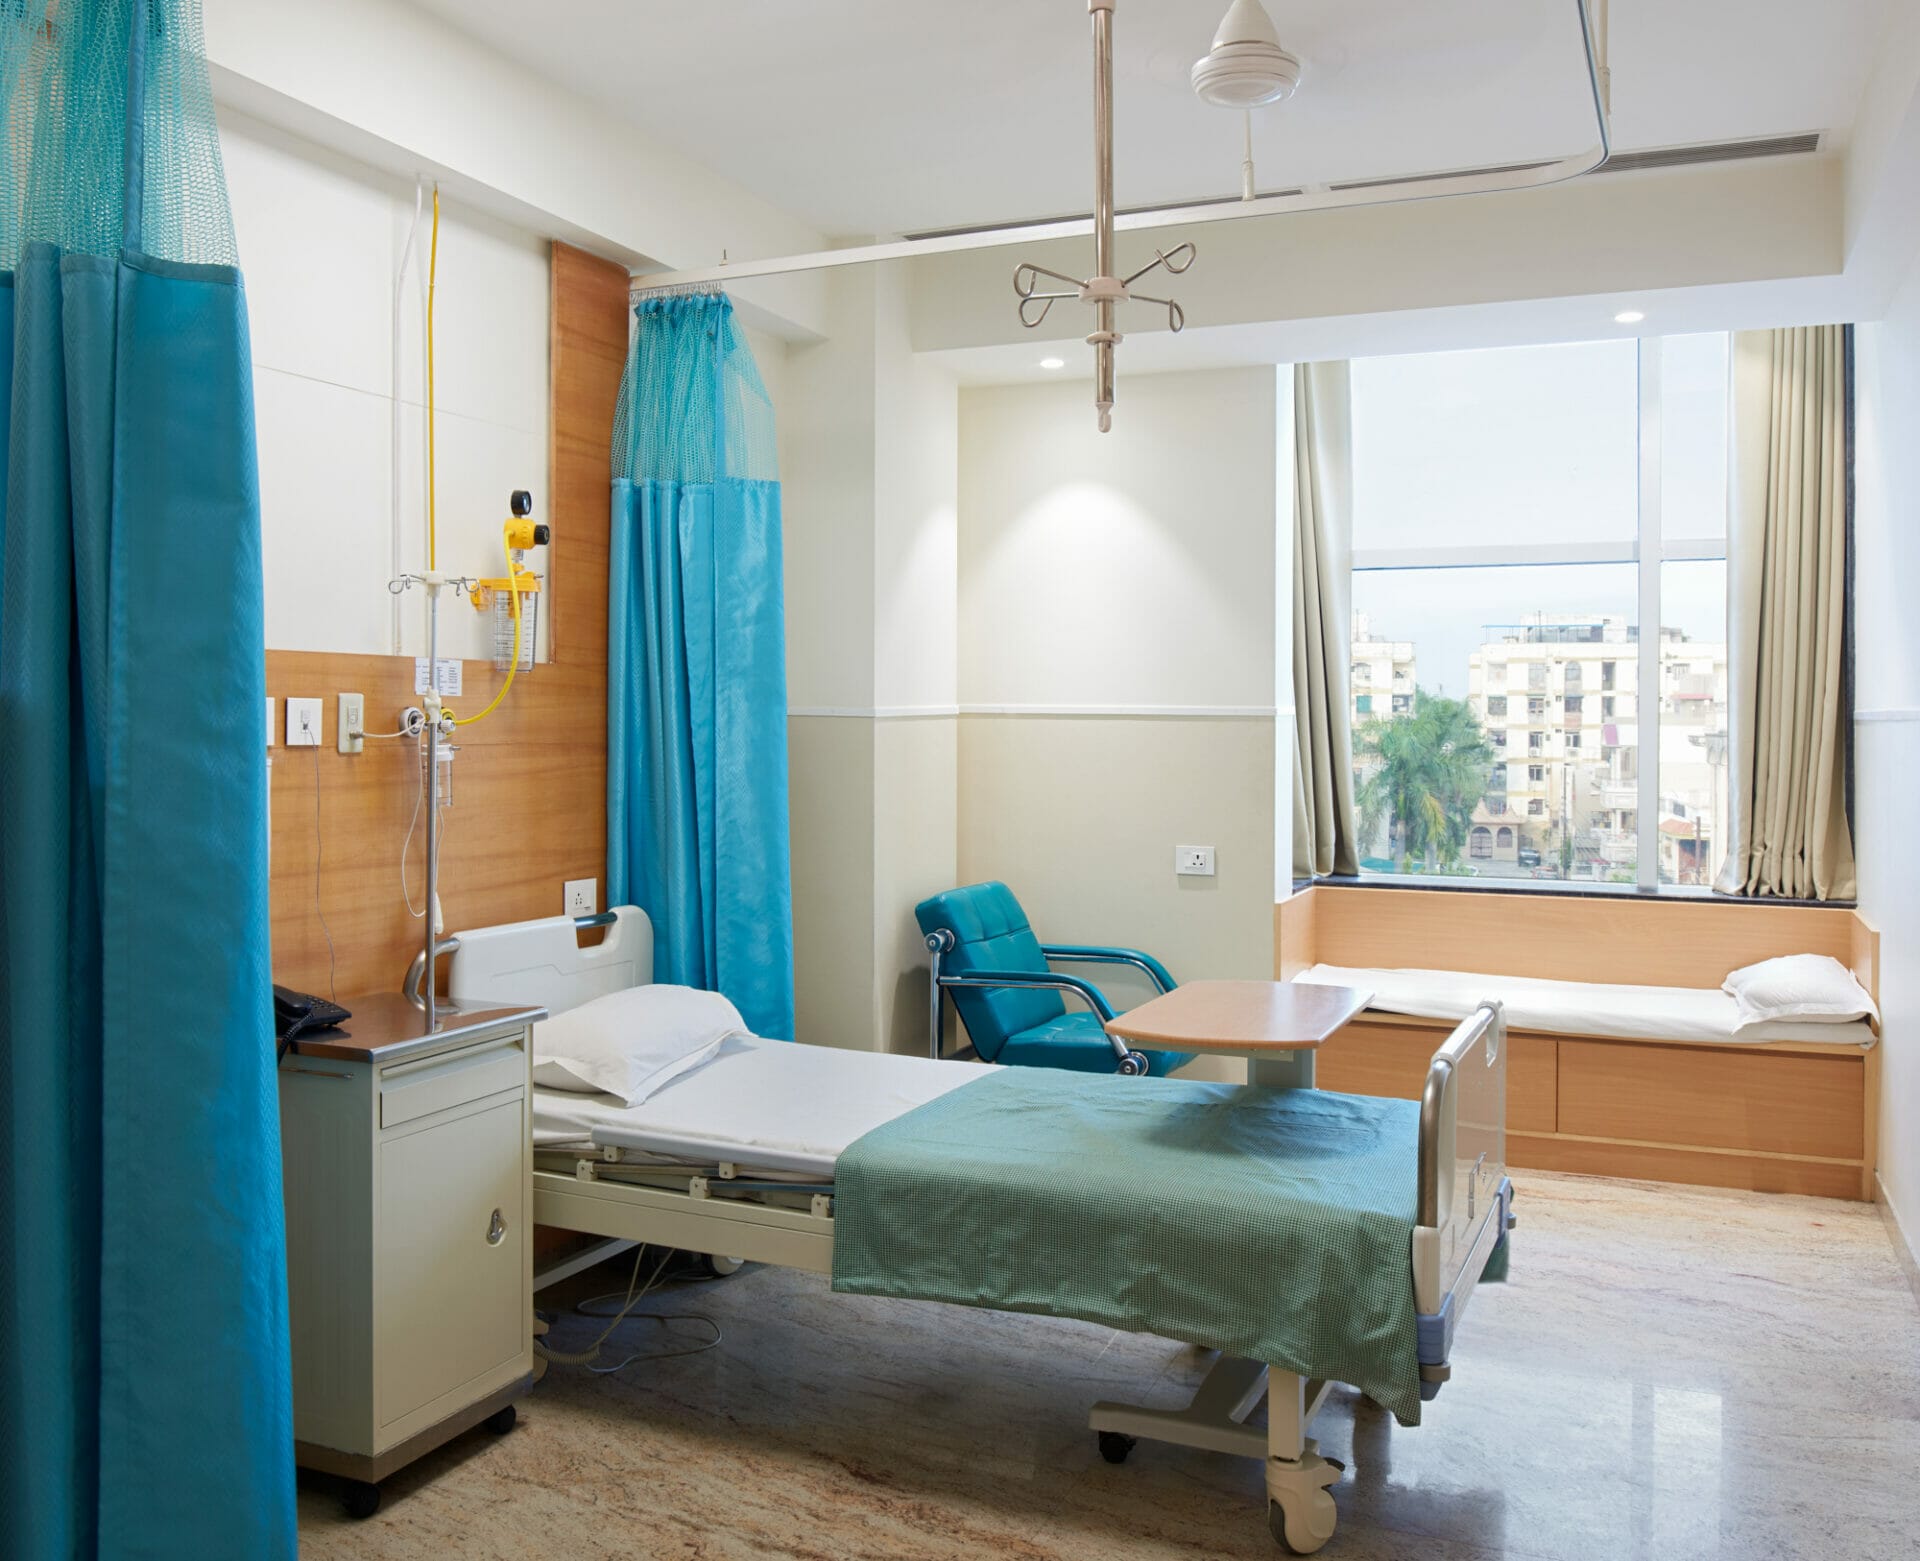 VGA Reinforces Hospital Infrastructure in Developing Cities